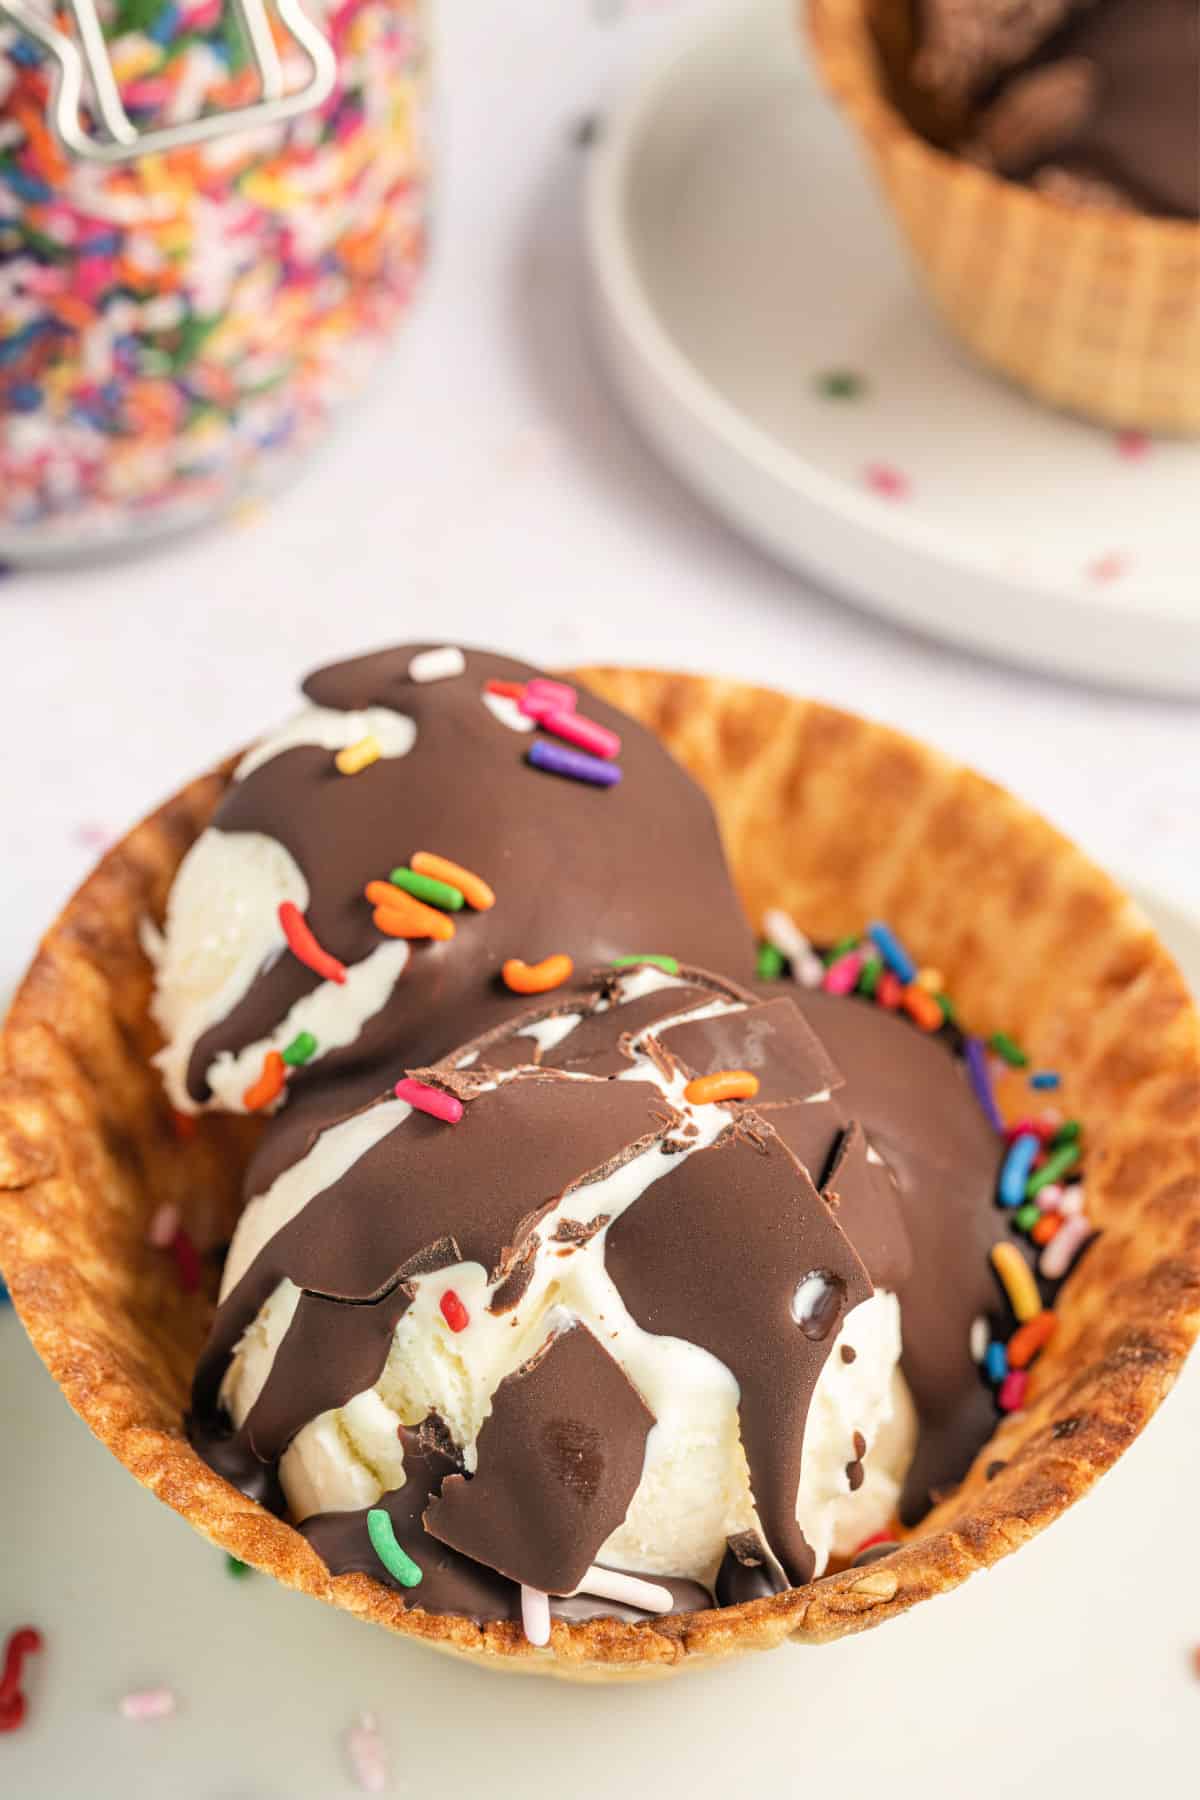 Chocolate topping with cracks over a vanilla ice cream waffle bowl.